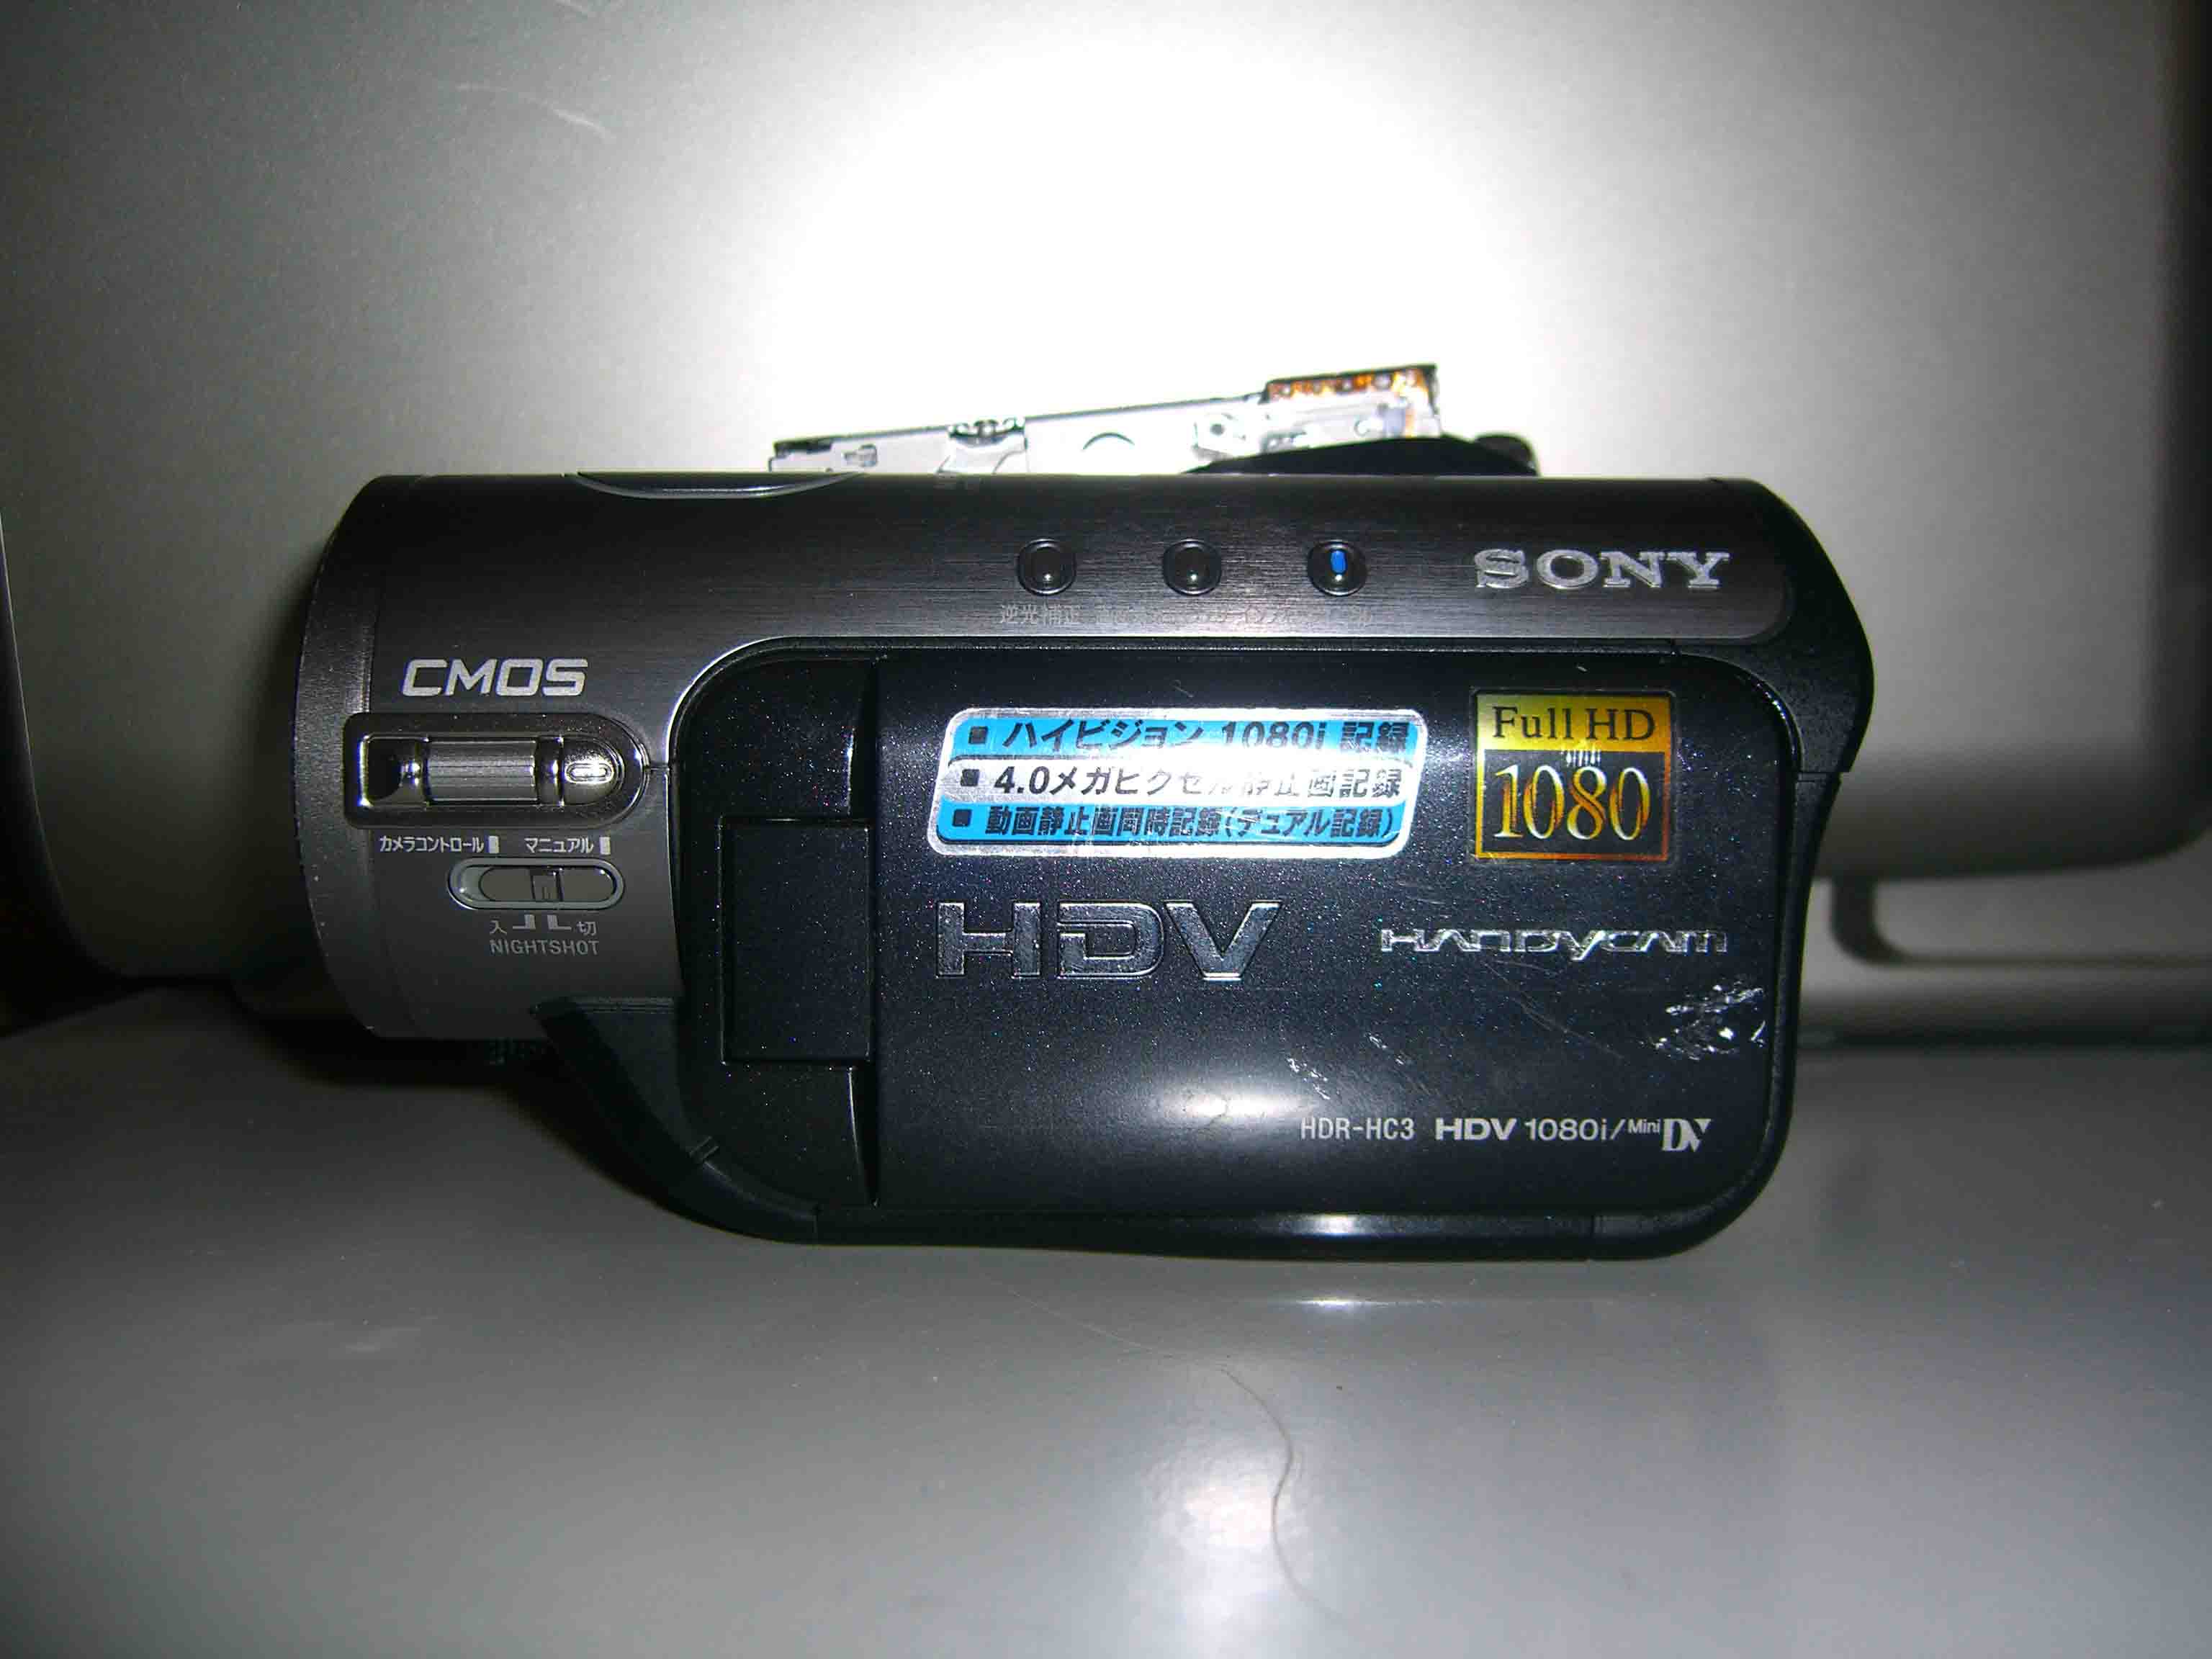 Sony DCR-TRV33 Camcorder 60 Minutes Mini DV Video Cassette Replacement by Panasonic 